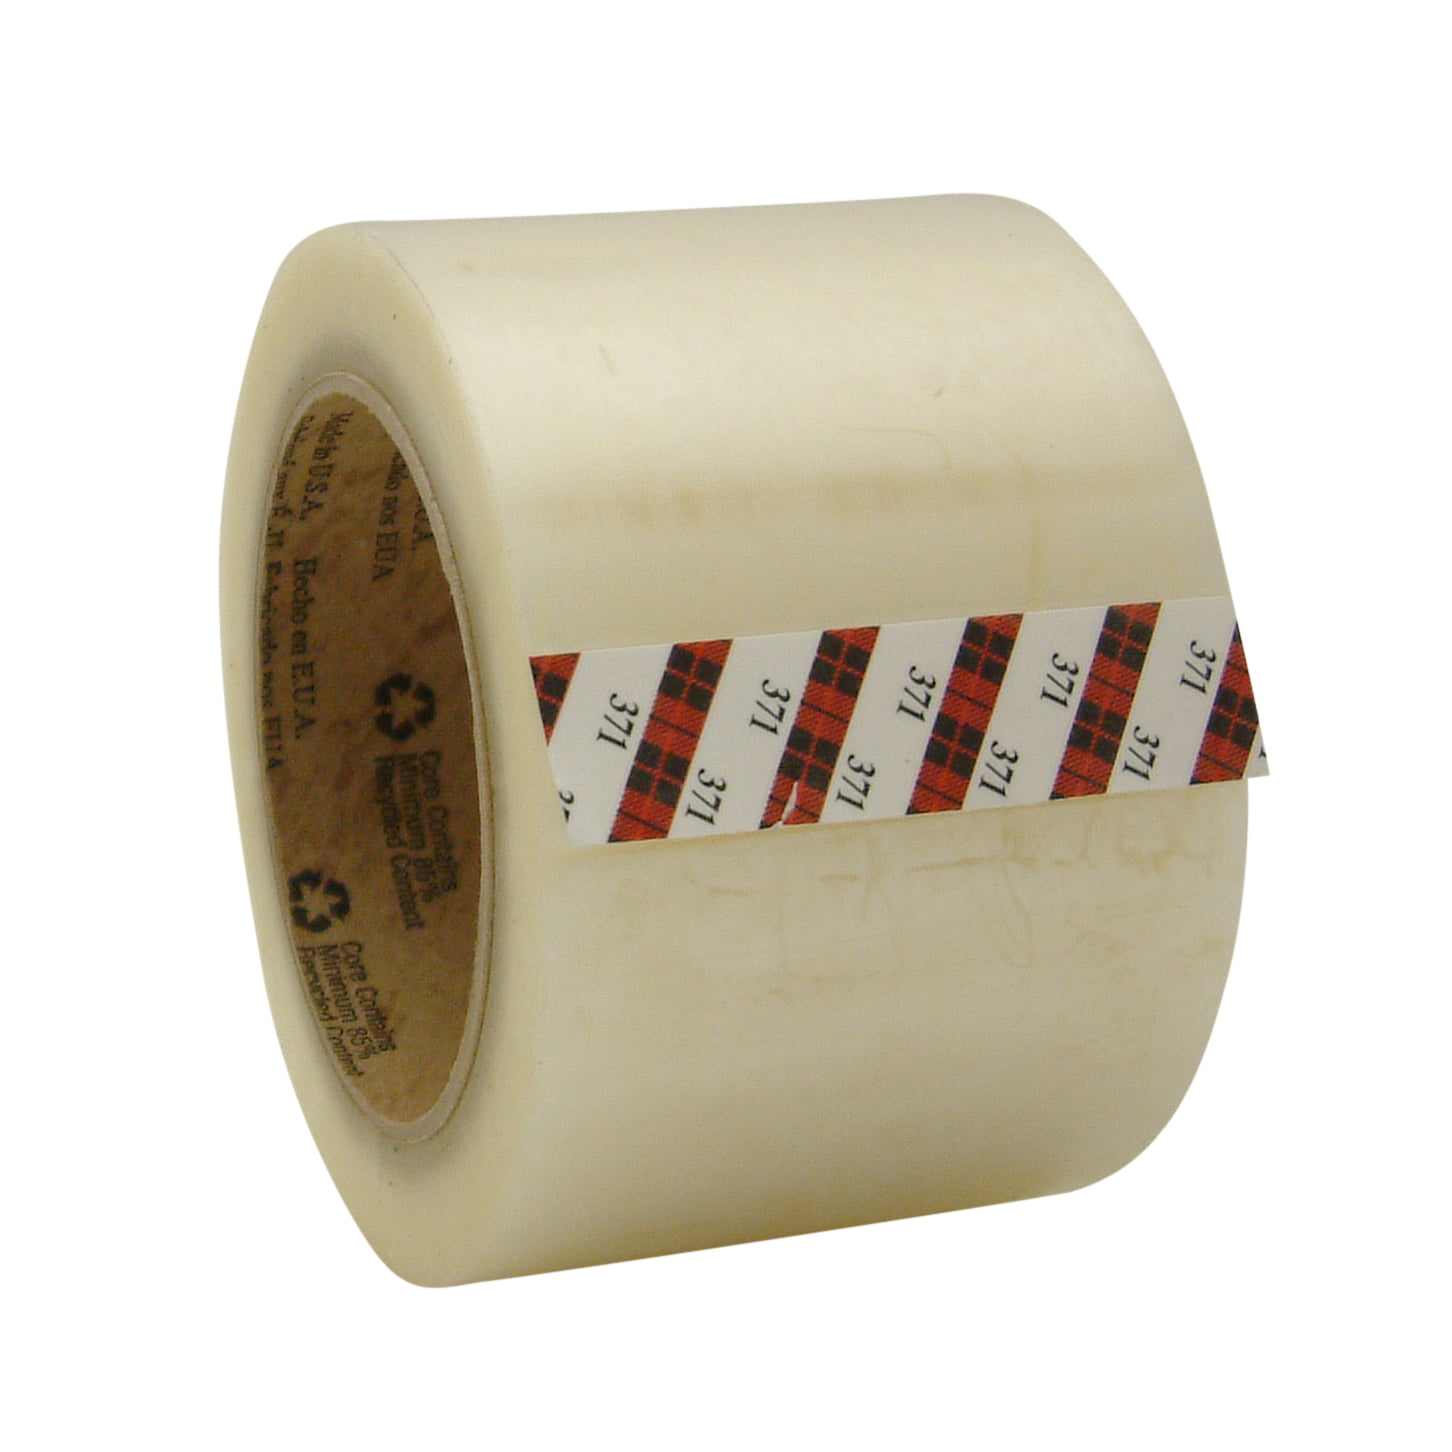 12 ROLLS 3M 371 SCOTCH CLEAR PACKAGING PACKING TAPE 48MM X 66M FREE 24HR DEL 